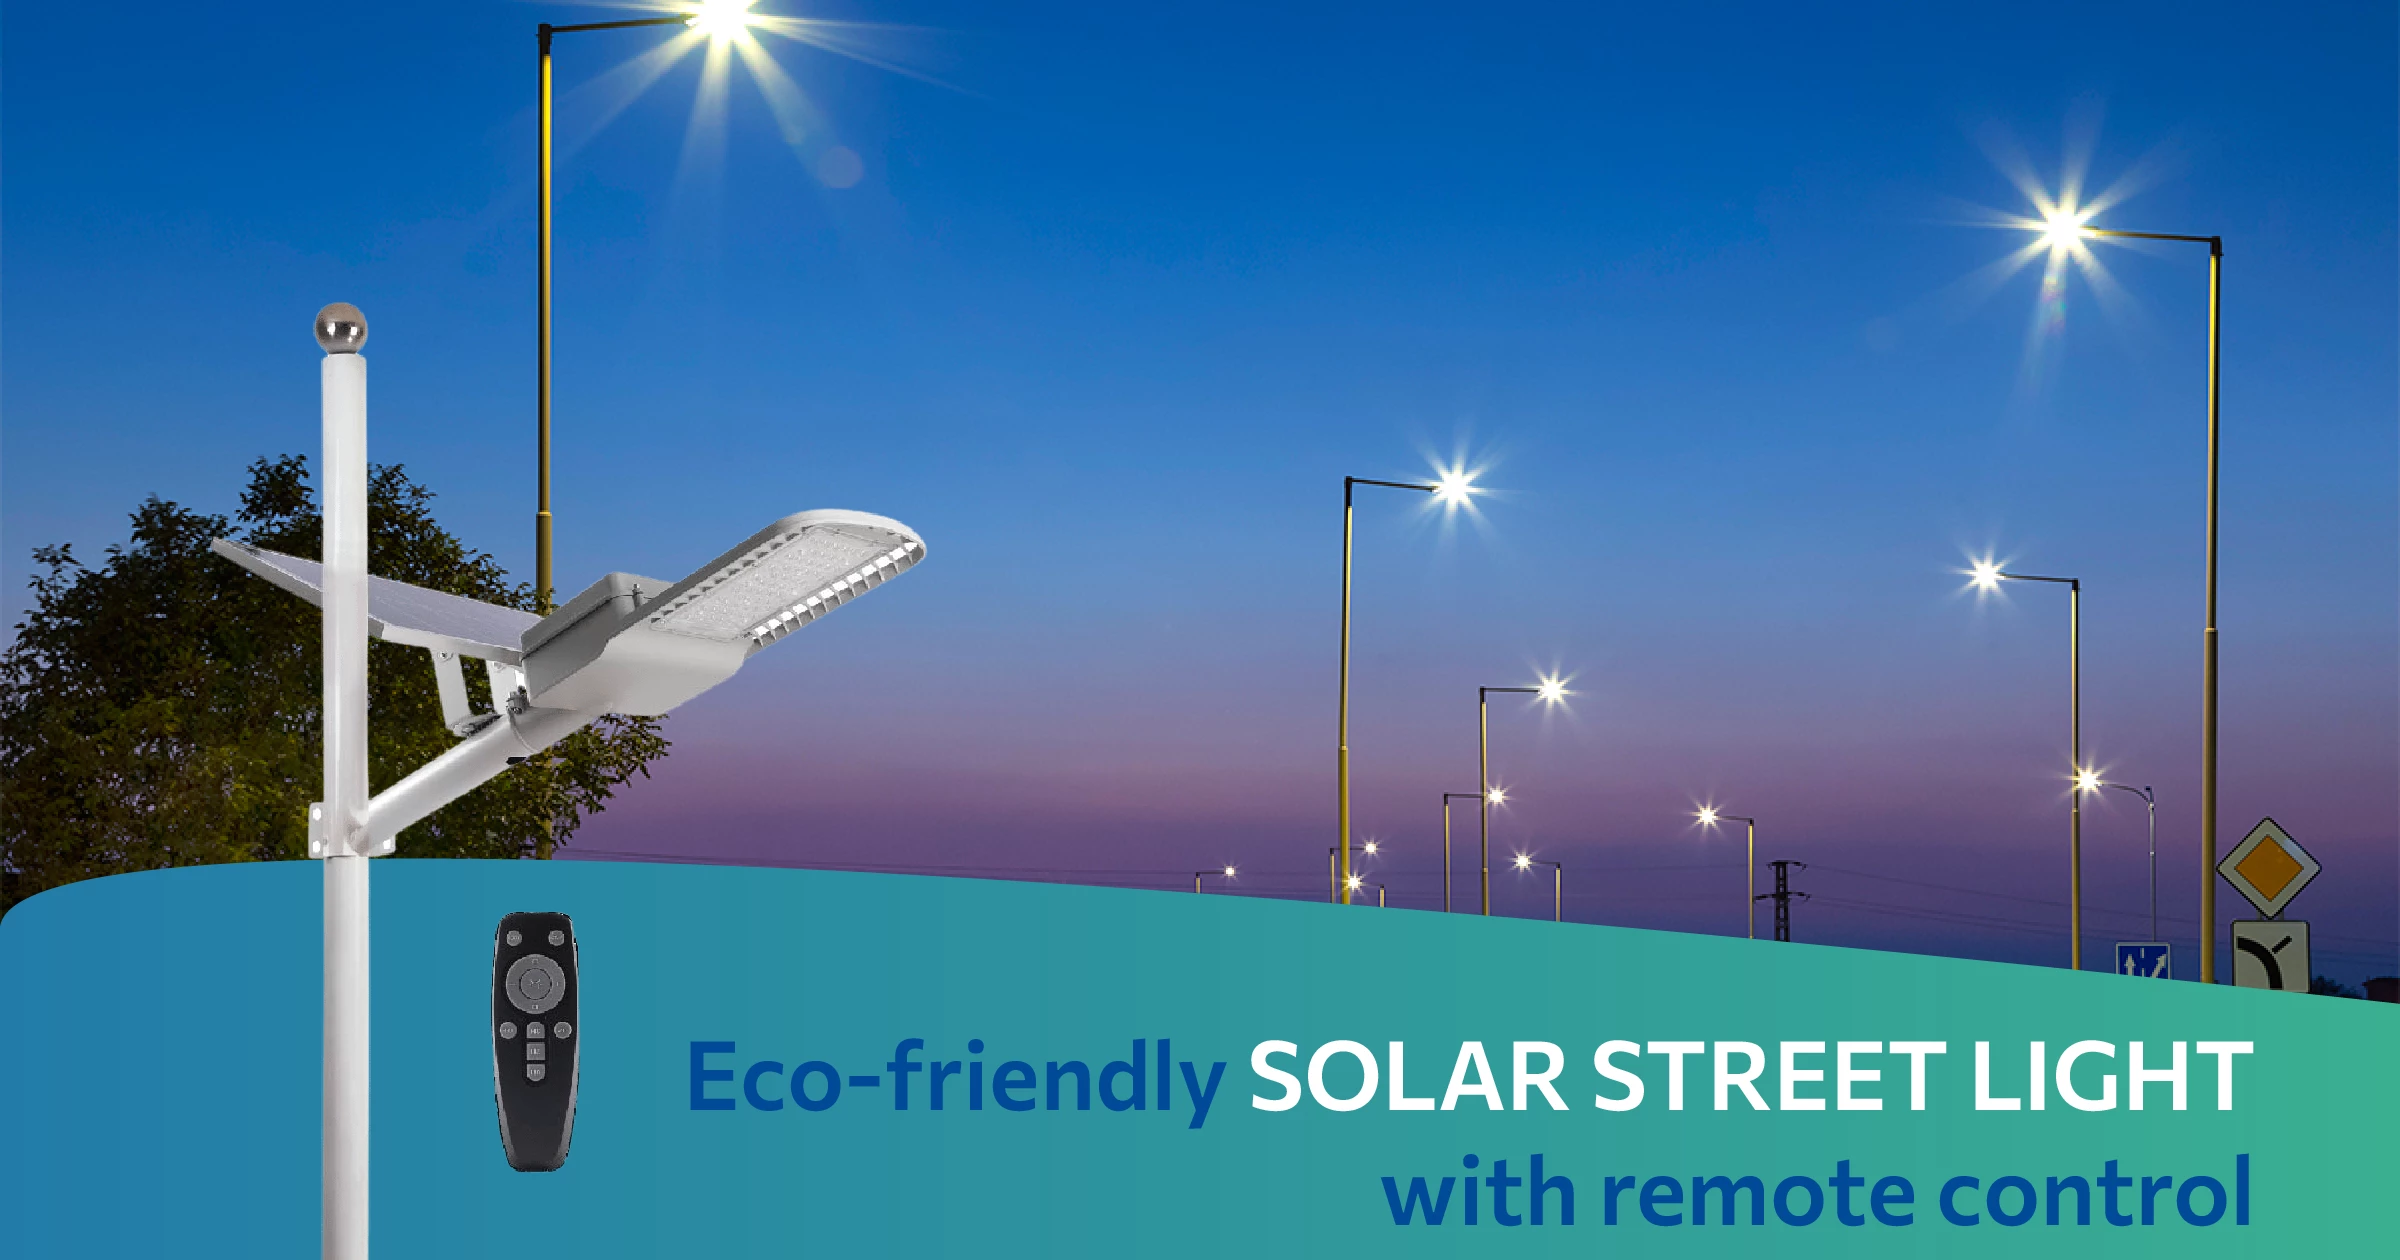 Rang Dong’s eco-friendly solar street light with remote control